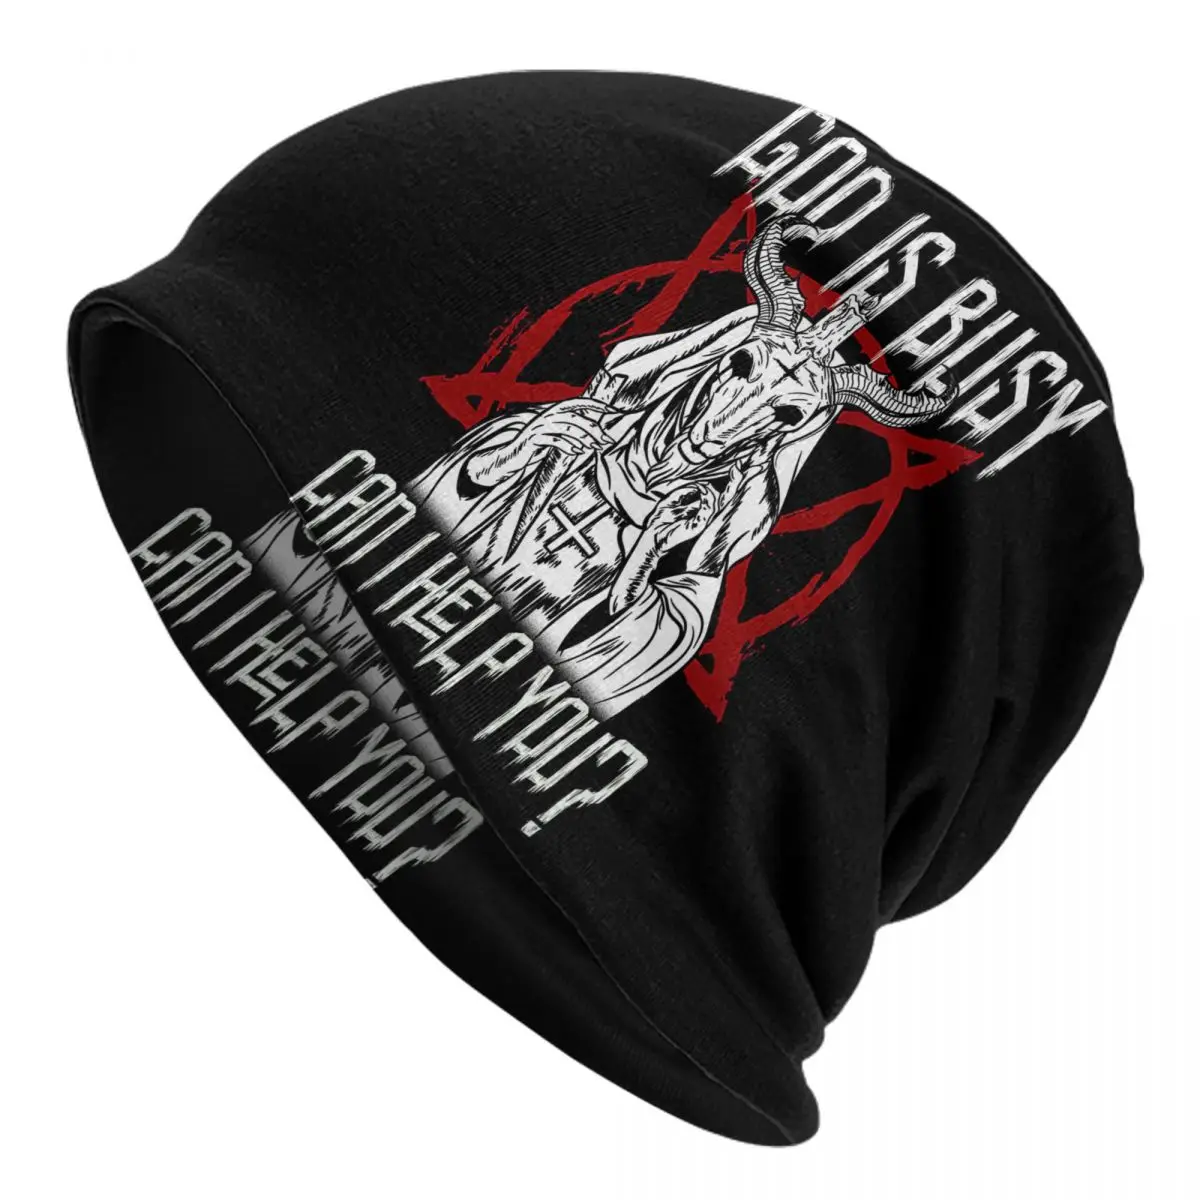 

God Is Busy Can I Help You Satanic Baphomet Print Adult Men's Women's Knit Hat Keep warm winter Funny knitted hat